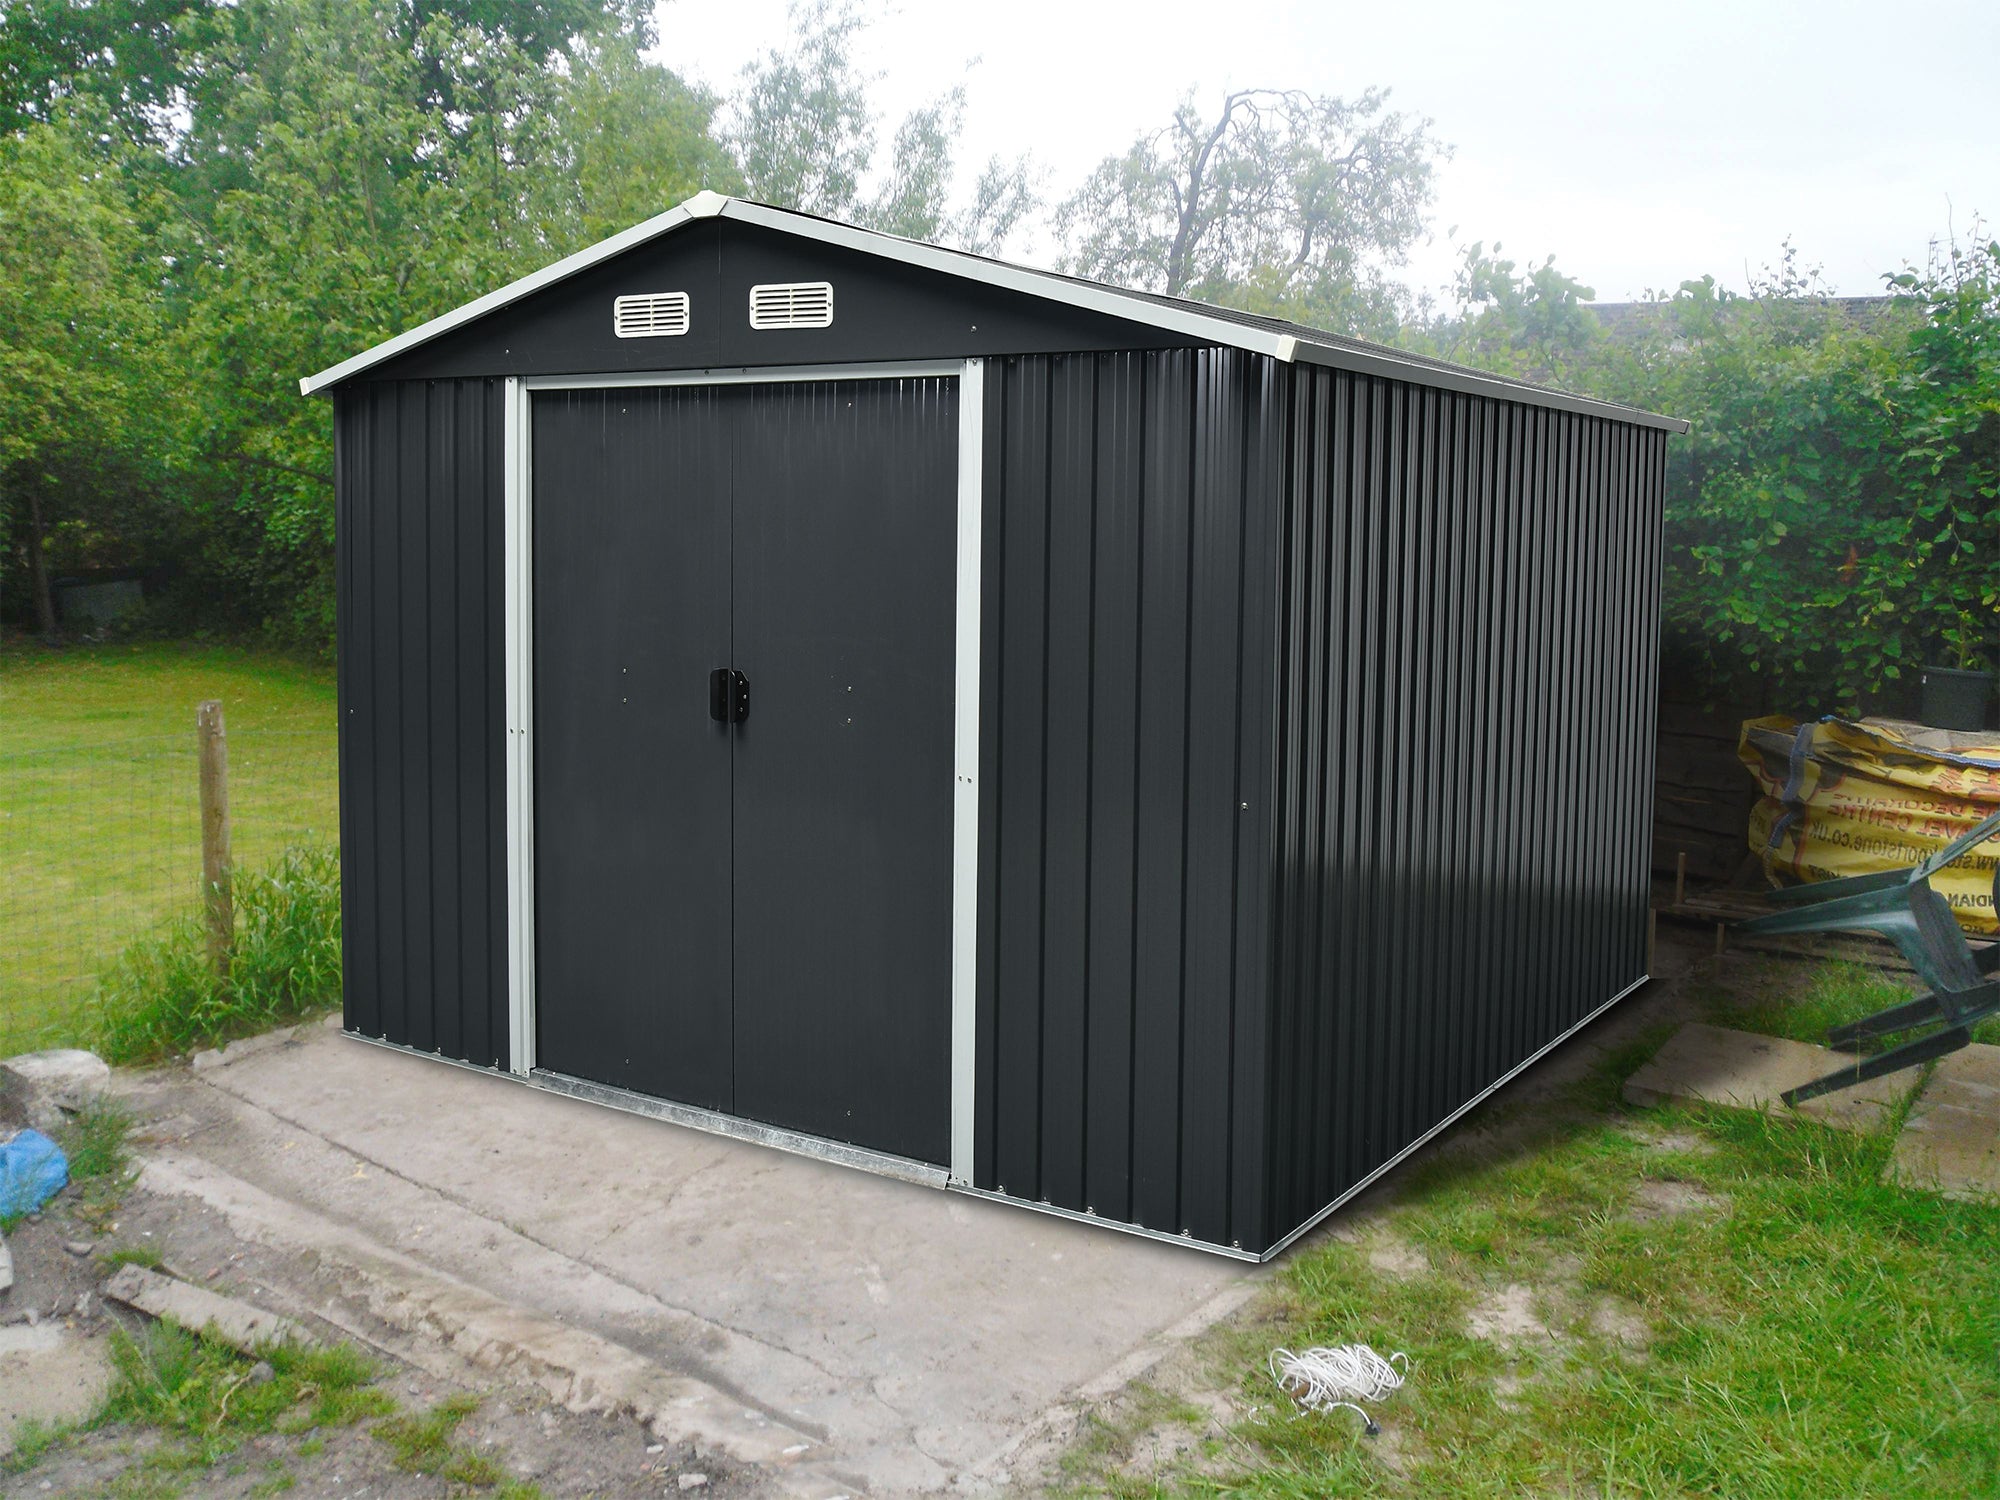 SummitStorage Hub, 9' X 11' Galvanized Steel Garden Shed with 4 Vents & Lockable Double Sliding Door, Utility Tool Shed Storage House for Backyard, Patio, Lawn - Black